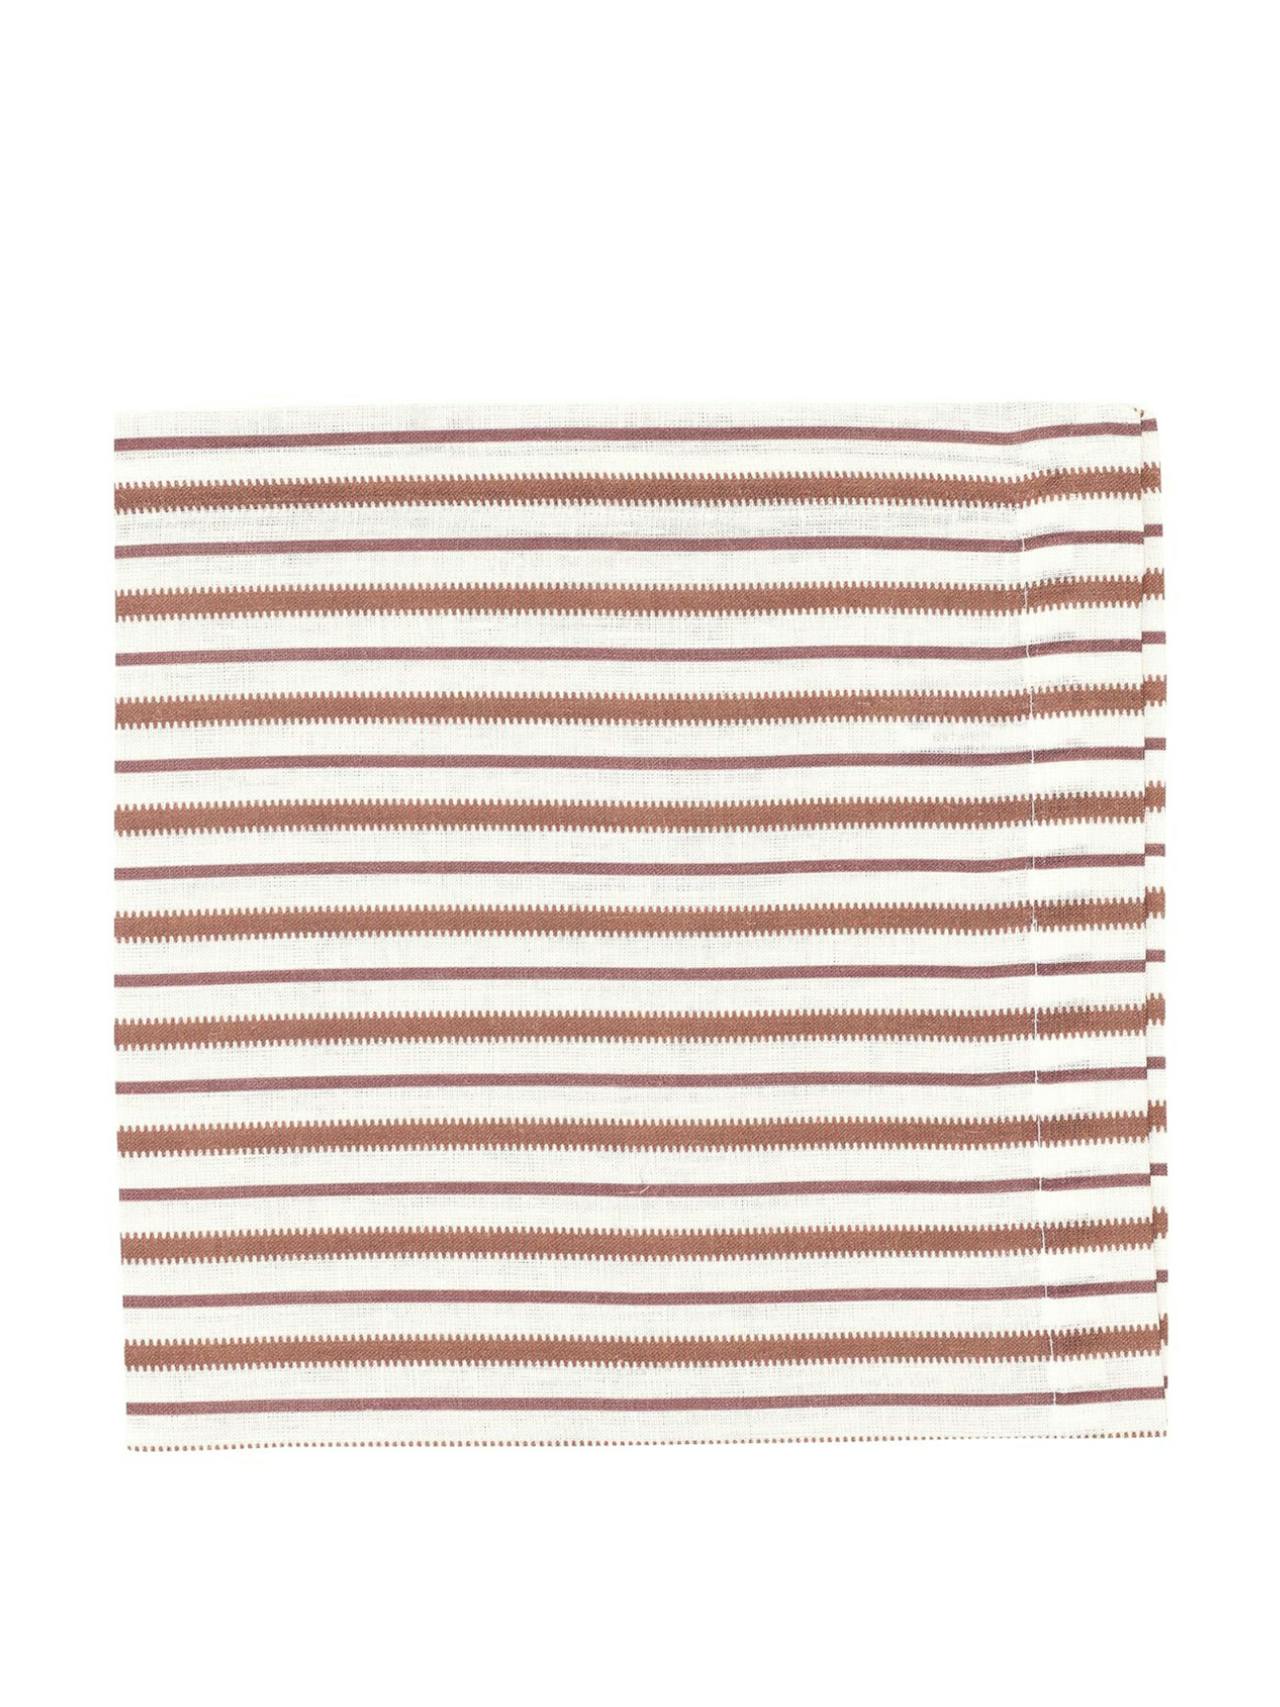 Victoria striped linen napkin in dusty rosewood